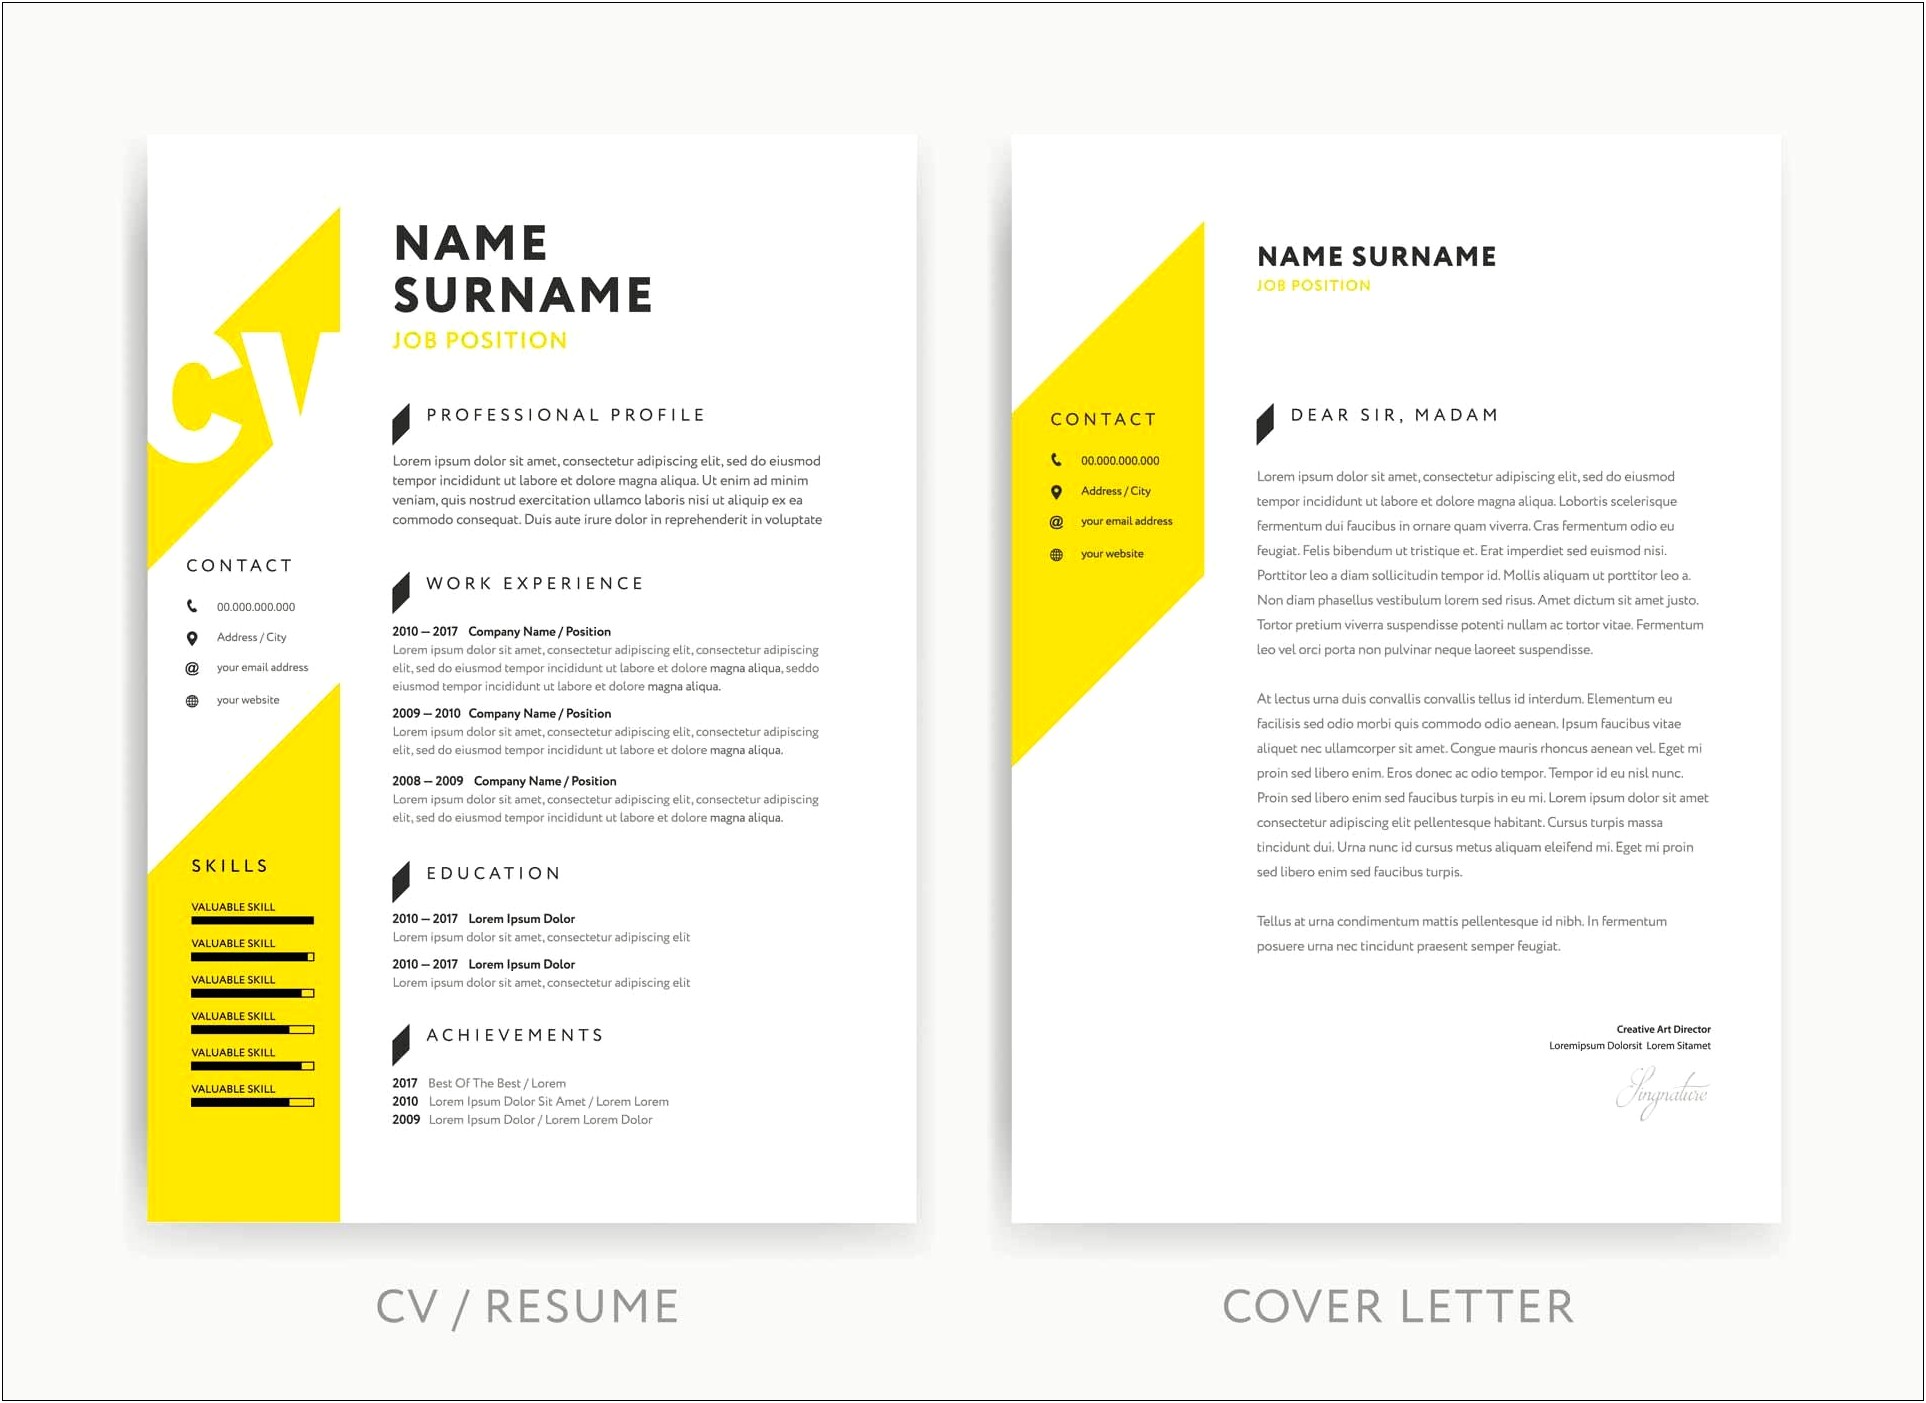 Resume Cover Letter Without Contact Name